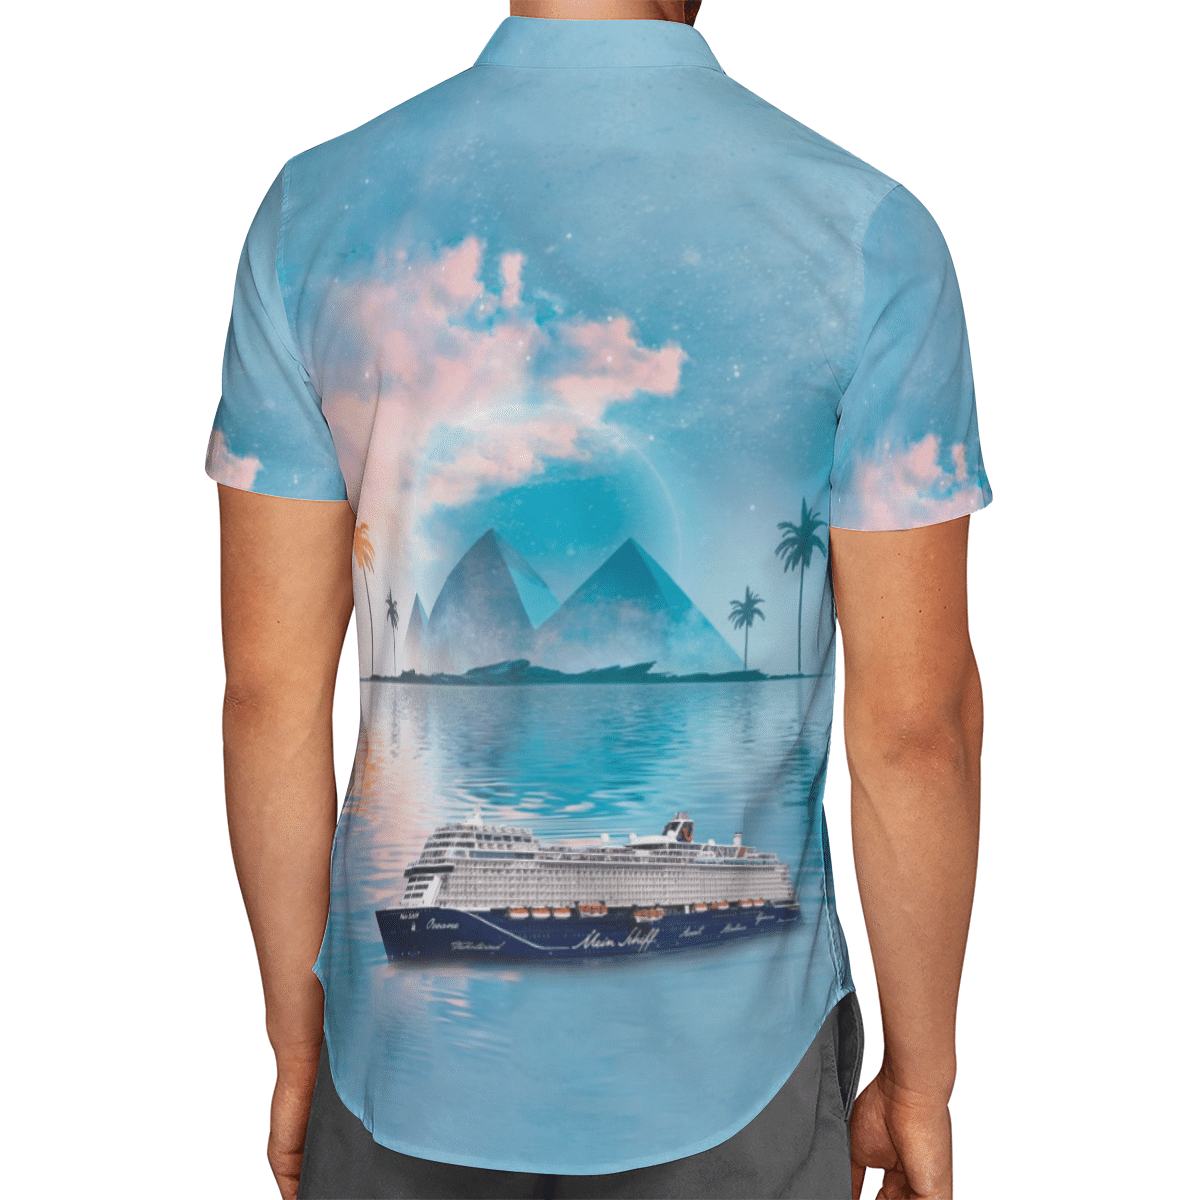 Going to the beach with a quality shirt 29